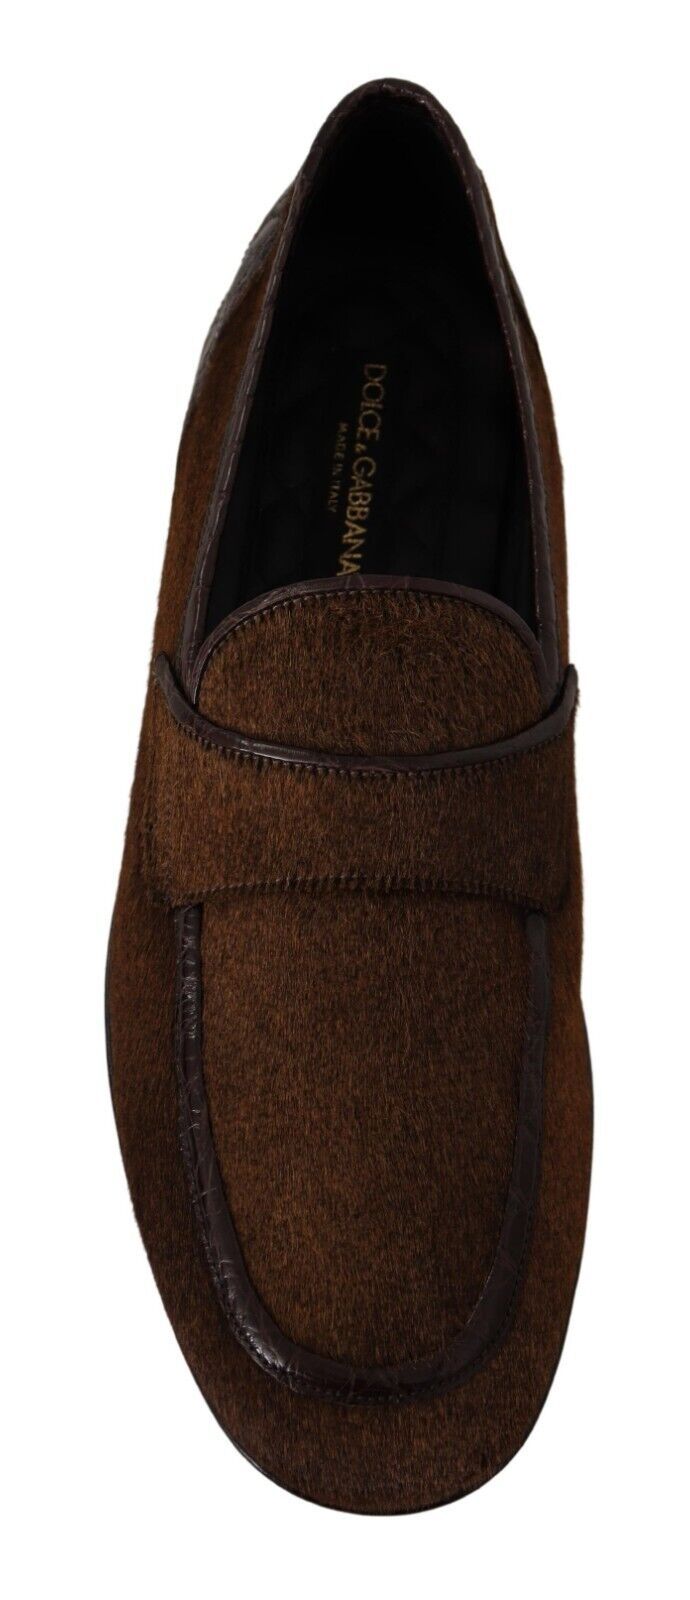 Dolce & Gabbana Exquisite Exotic Leather Loafers